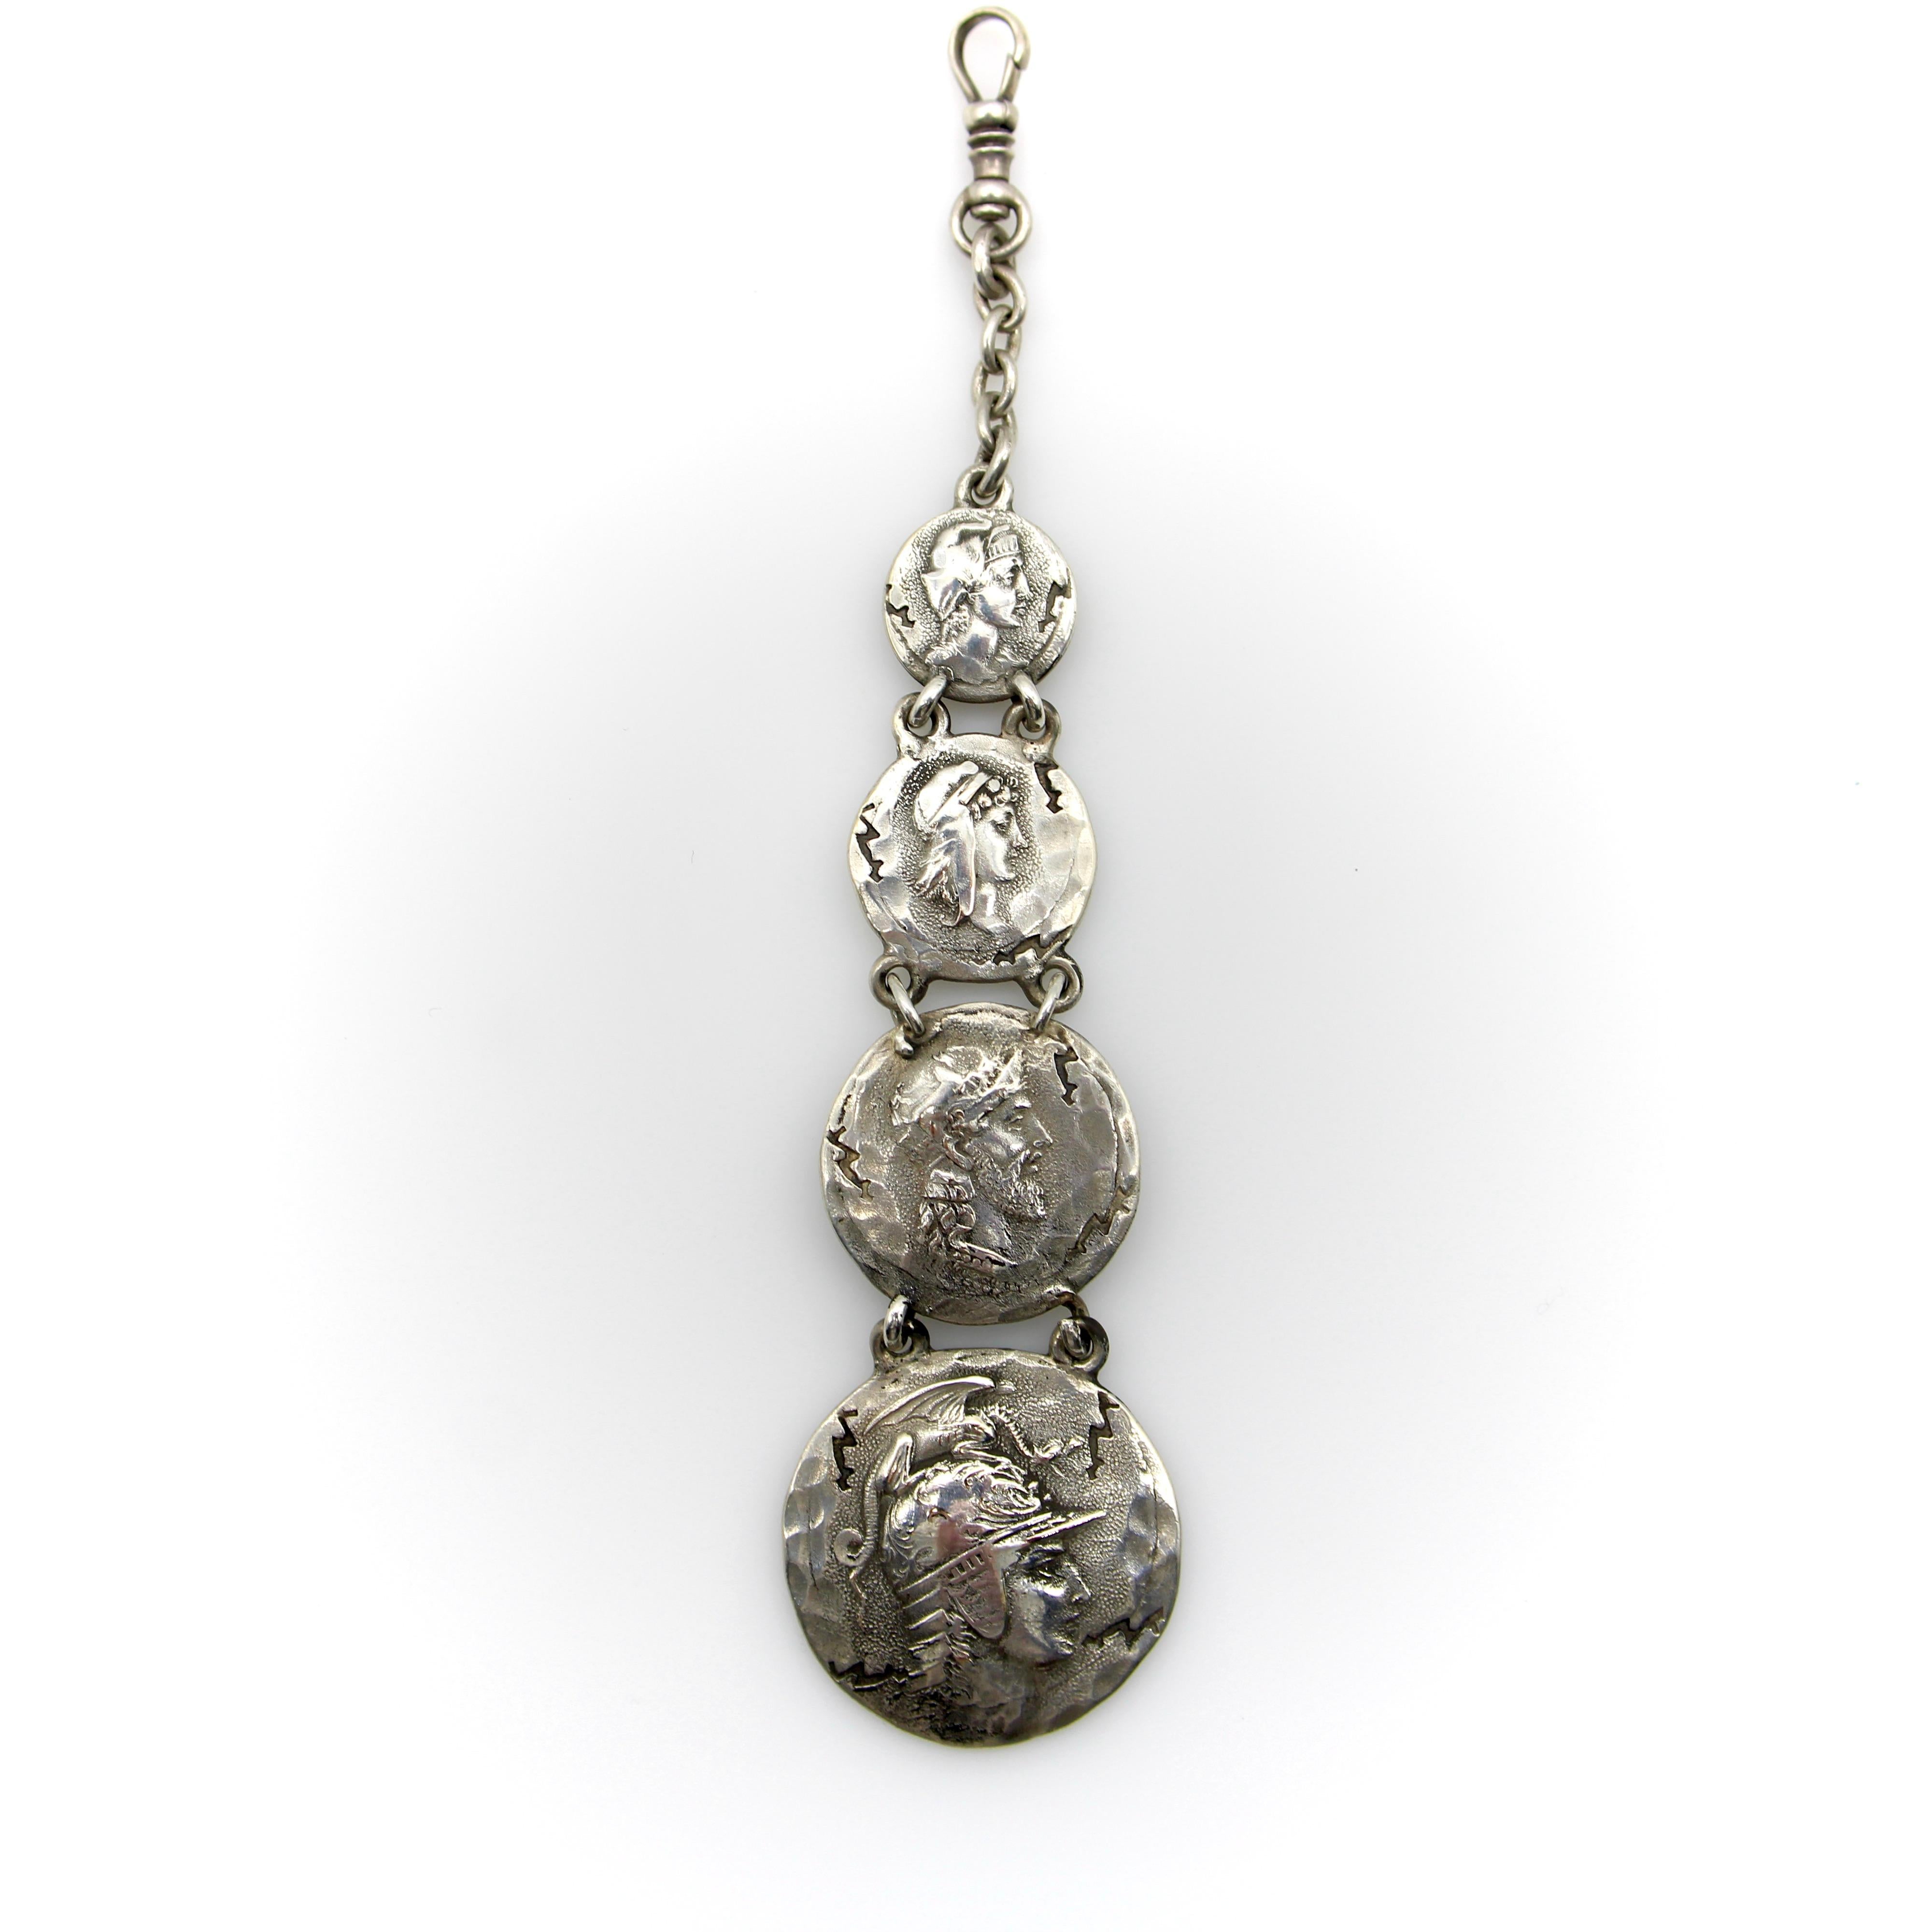 This sterling silver fob features four graduated homeric medallions, dangling from a dog clip. Designed by George Shiebler, circa 1890’s, the piece was originally a watch fob; in contemporary use it makes a dramatic pendant when worn on a chain, or